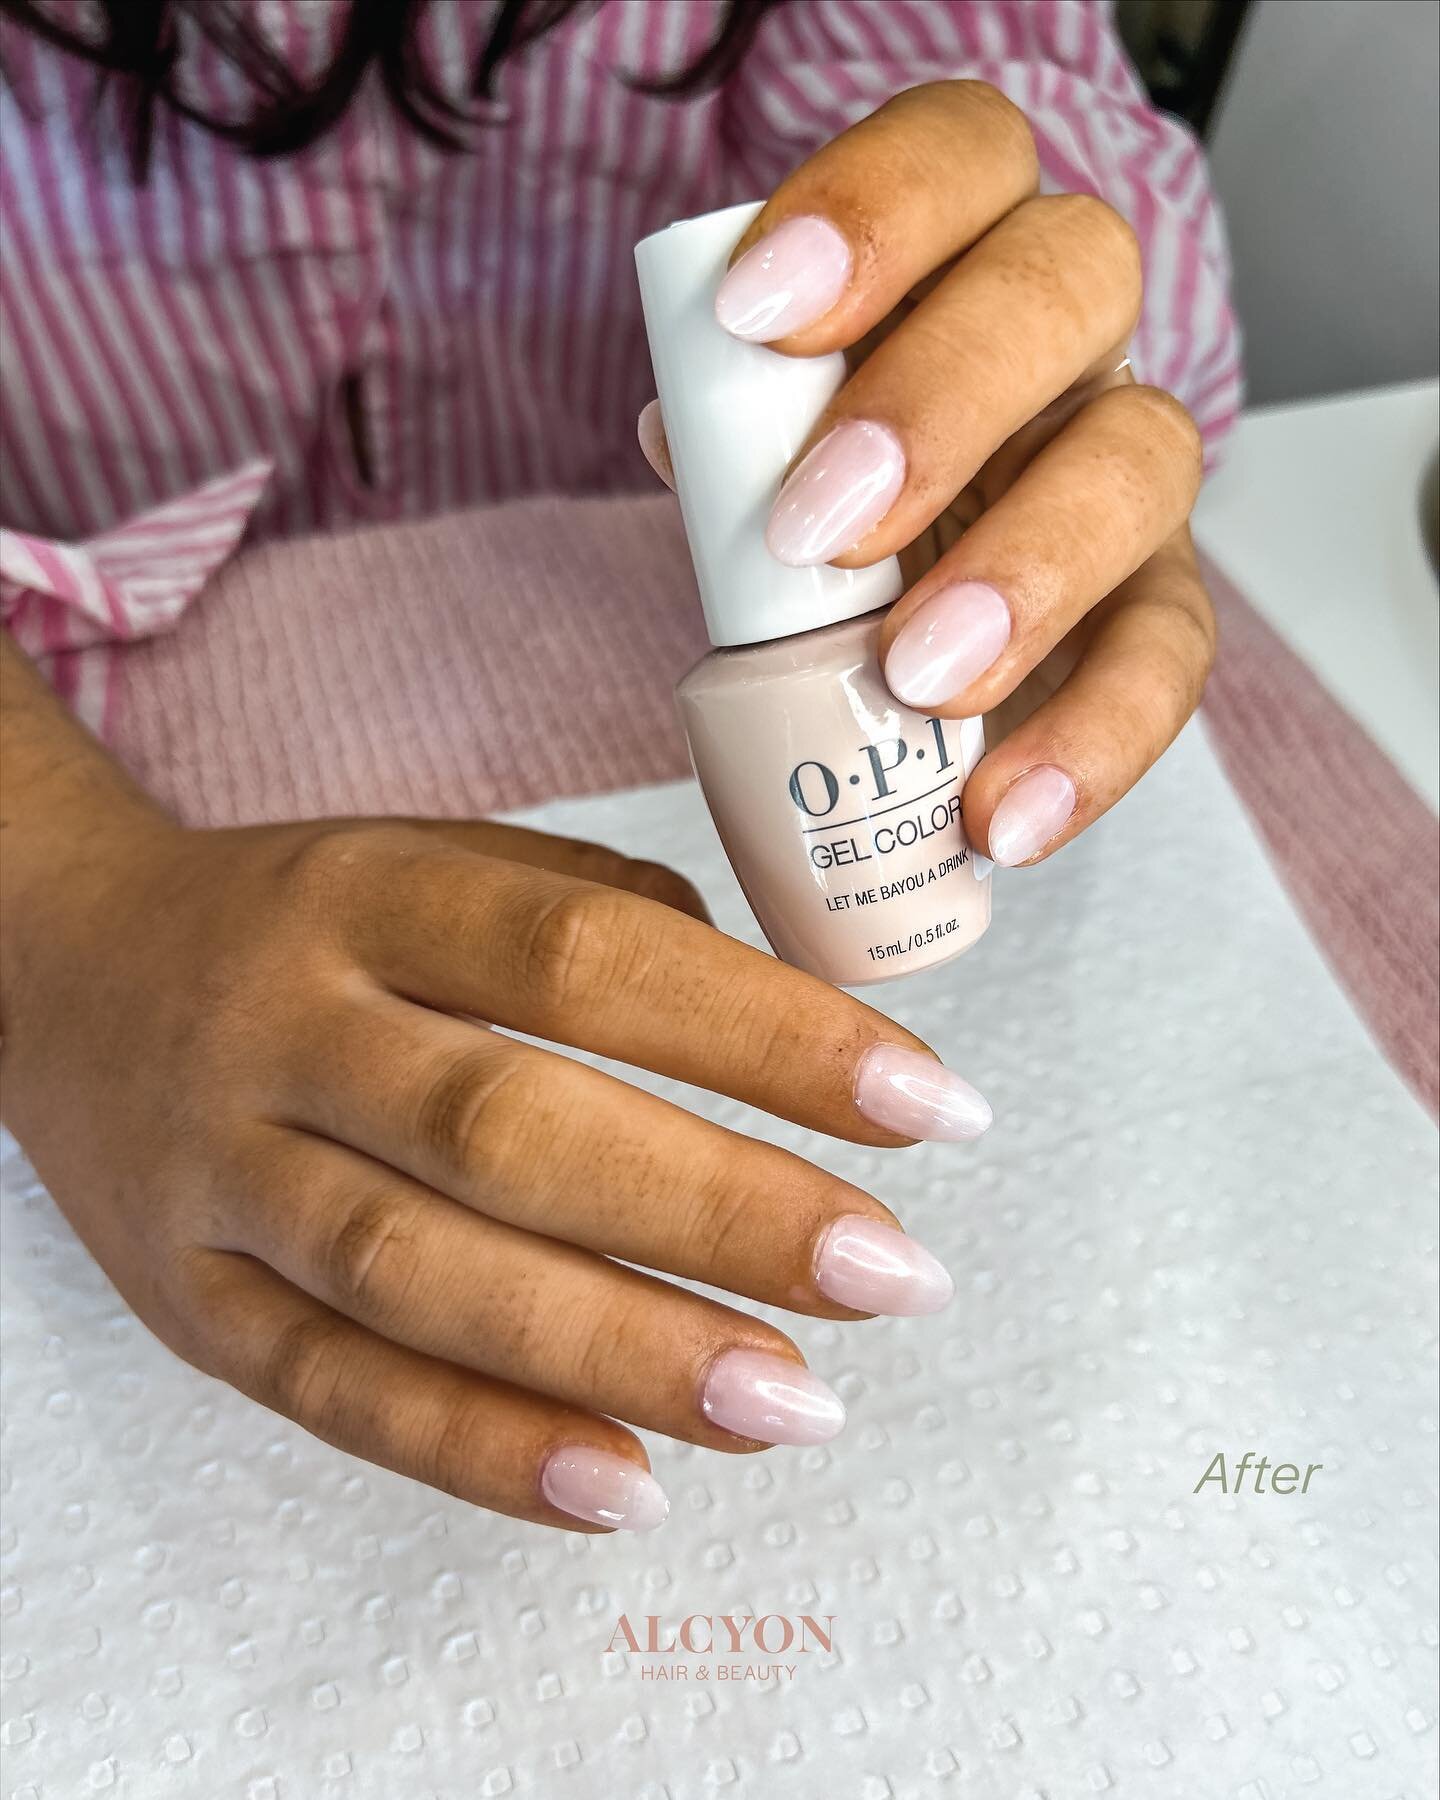 Transformation Thursday Nails!

Yesterday we shared Pia&rsquo;s Top 3 Favourite Nail Trends.

Today, we wanted to show you a before and after of her beautiful work ❤️

Pia transformed our gorgeous guests nails, ready for her semi-formal a few weeks a